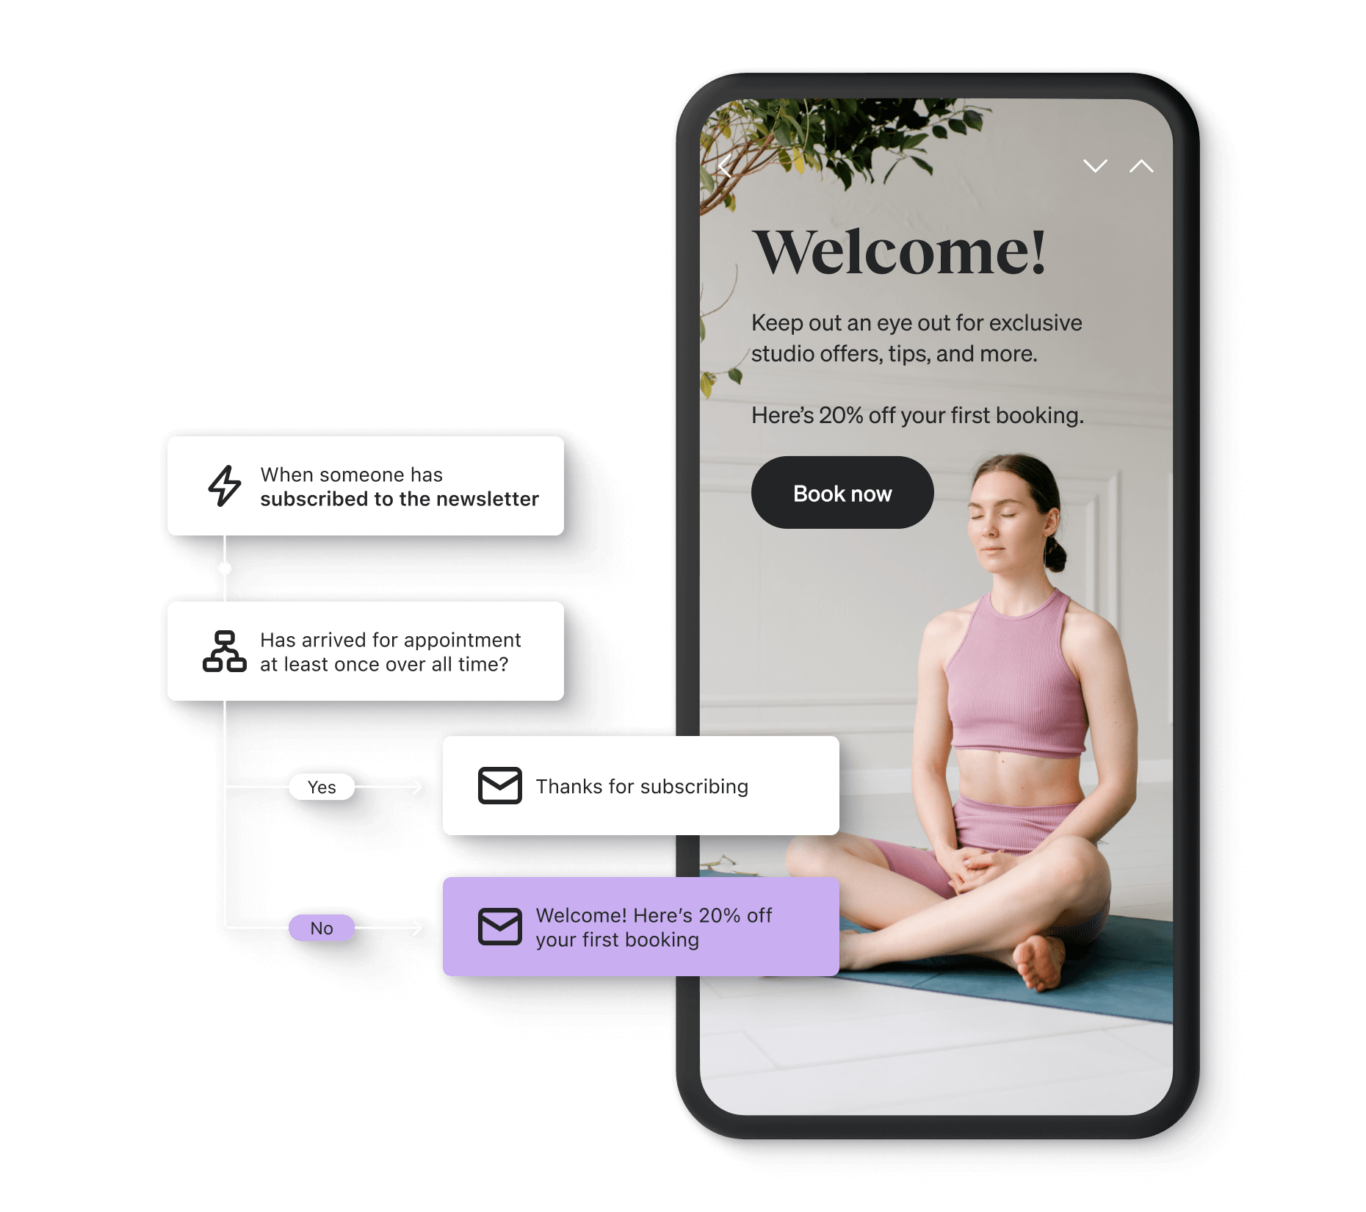 A phone showing a welcome email with a discount over an image of a woman sitting in workout clothes, with a Klaviyo product flow showing the logic used to send the email